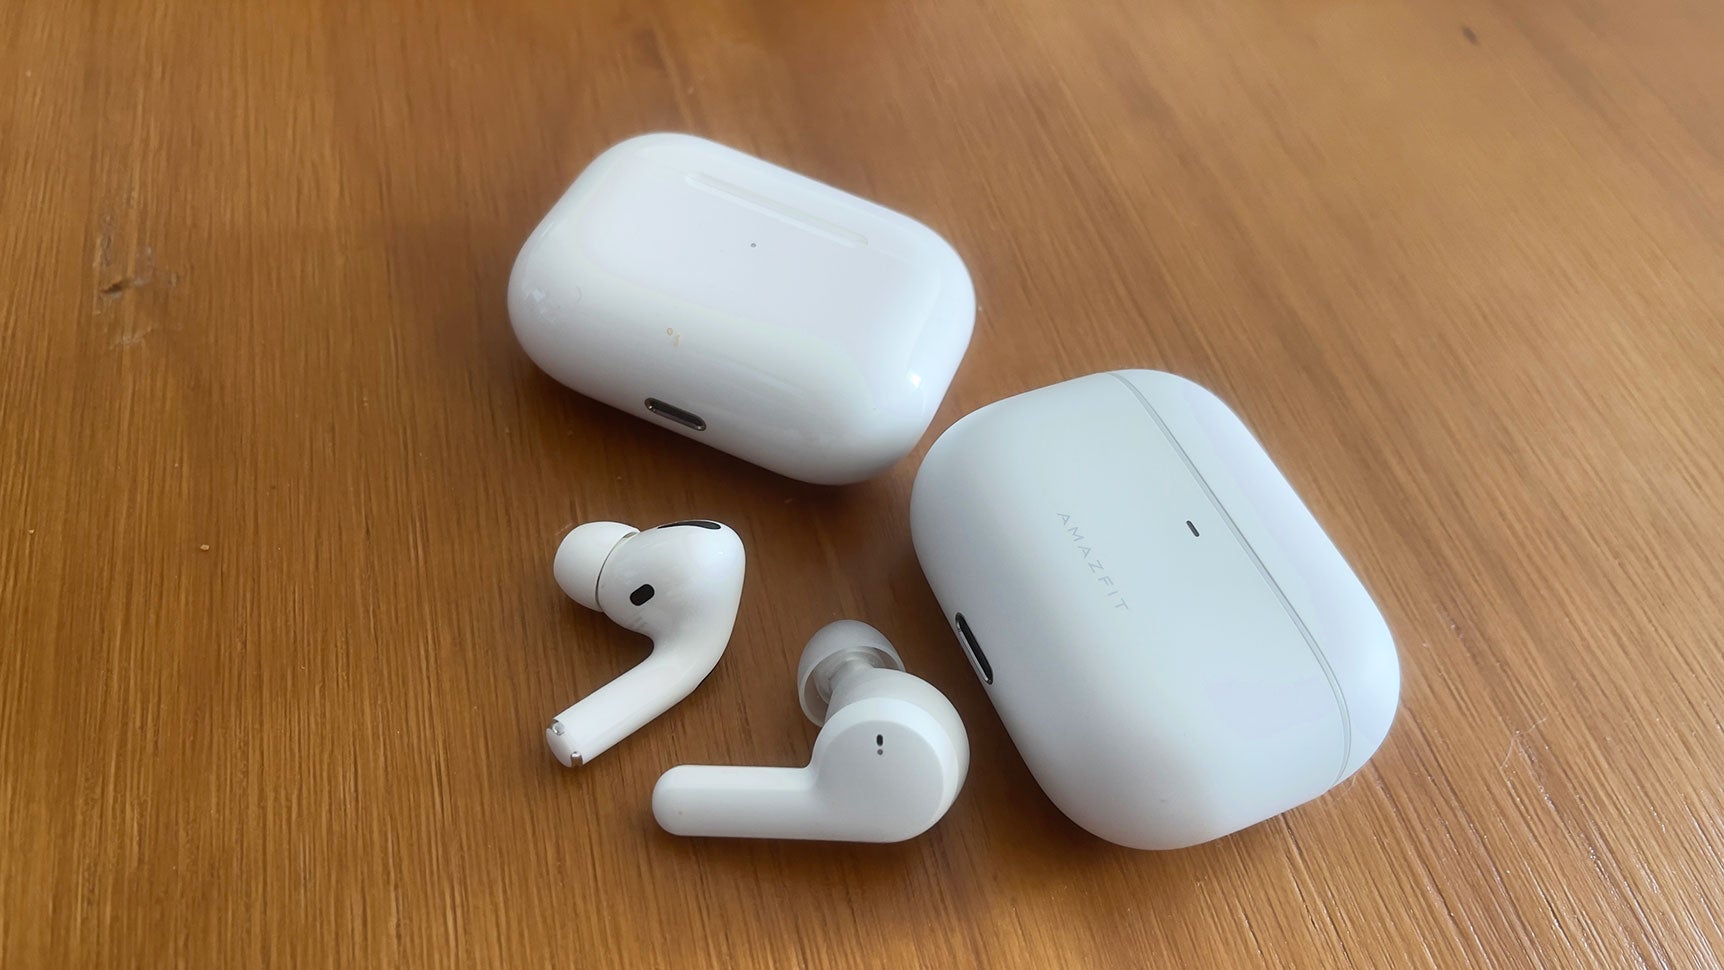 There's definitely a difference between the Powerbuds and AirPods Pro up close, but you can see how they look very similar at a glance. (Photo: Victoria Song/Gizmodo)